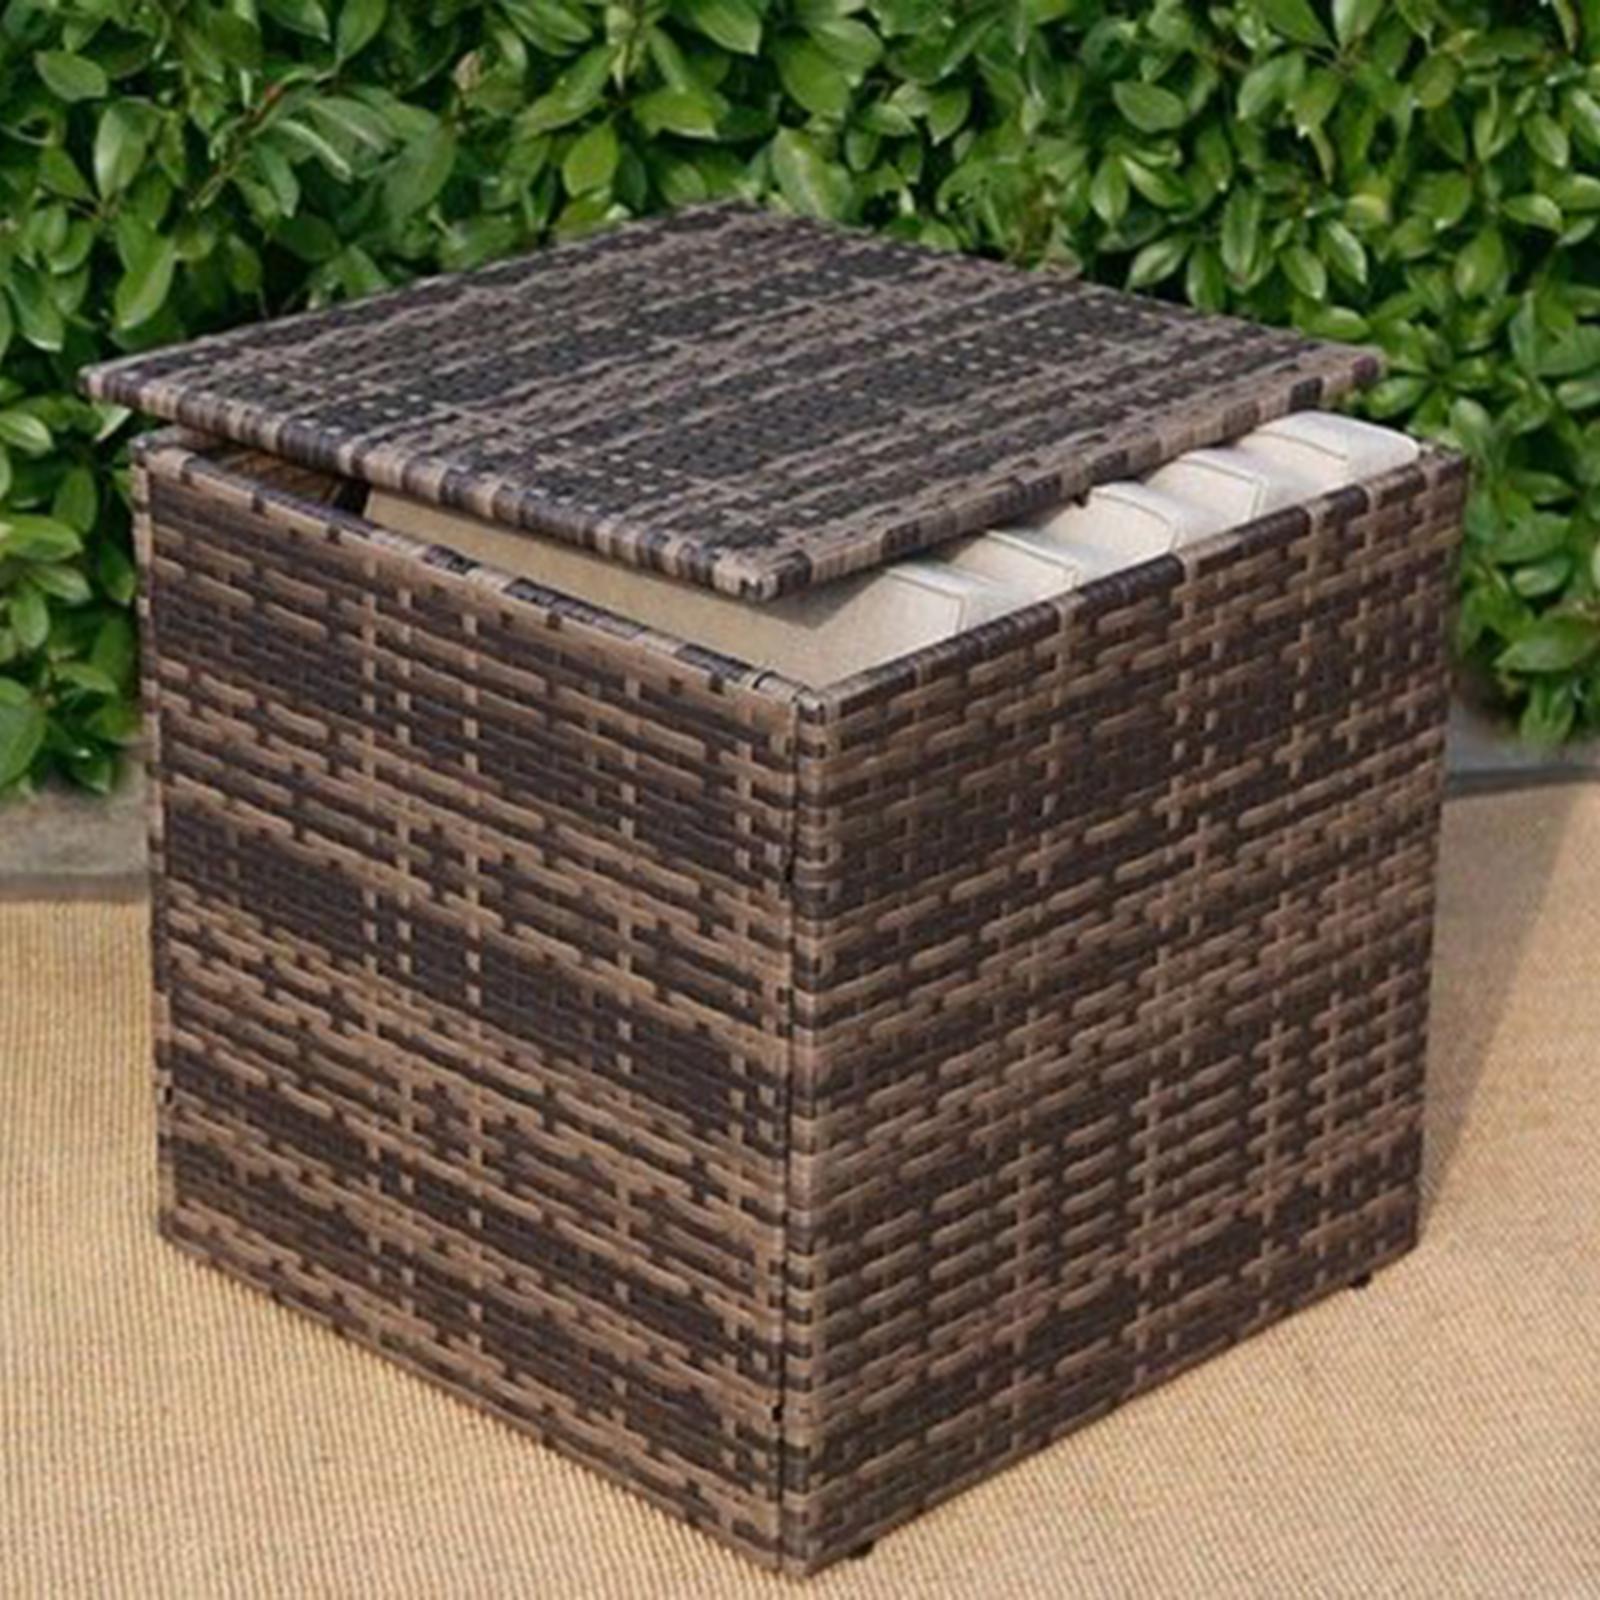 Baner Garden A105 Outdoor Glass Rattan Garden Square Coffee Table with Storage Compartment - image 2 of 2